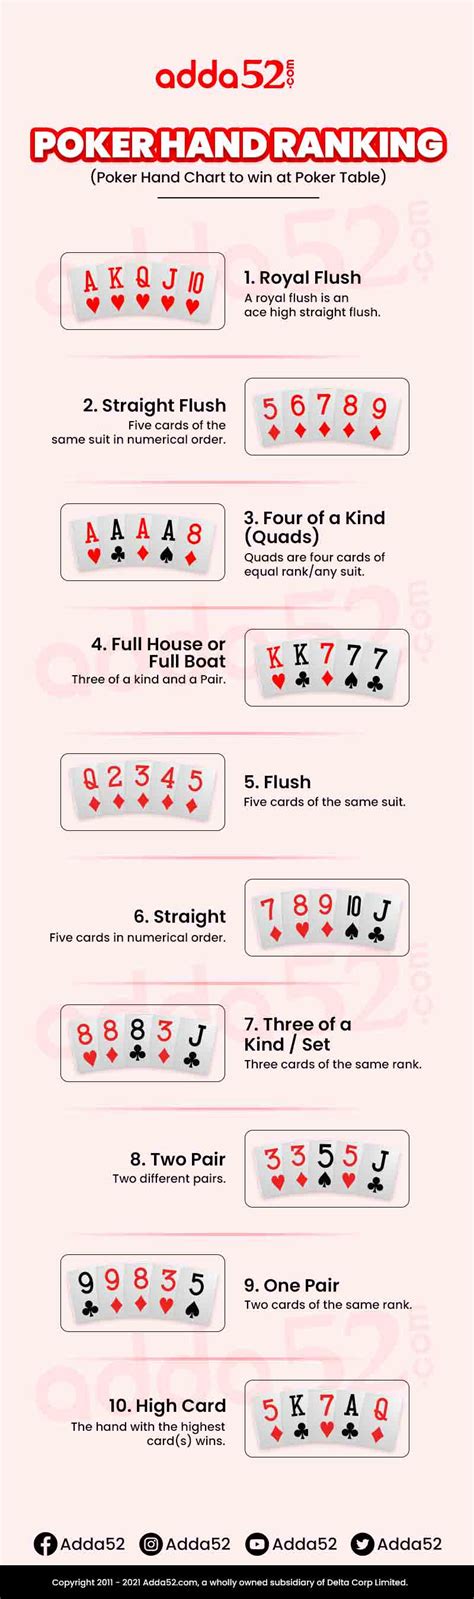 sequence of poker <b>noituloS</b>